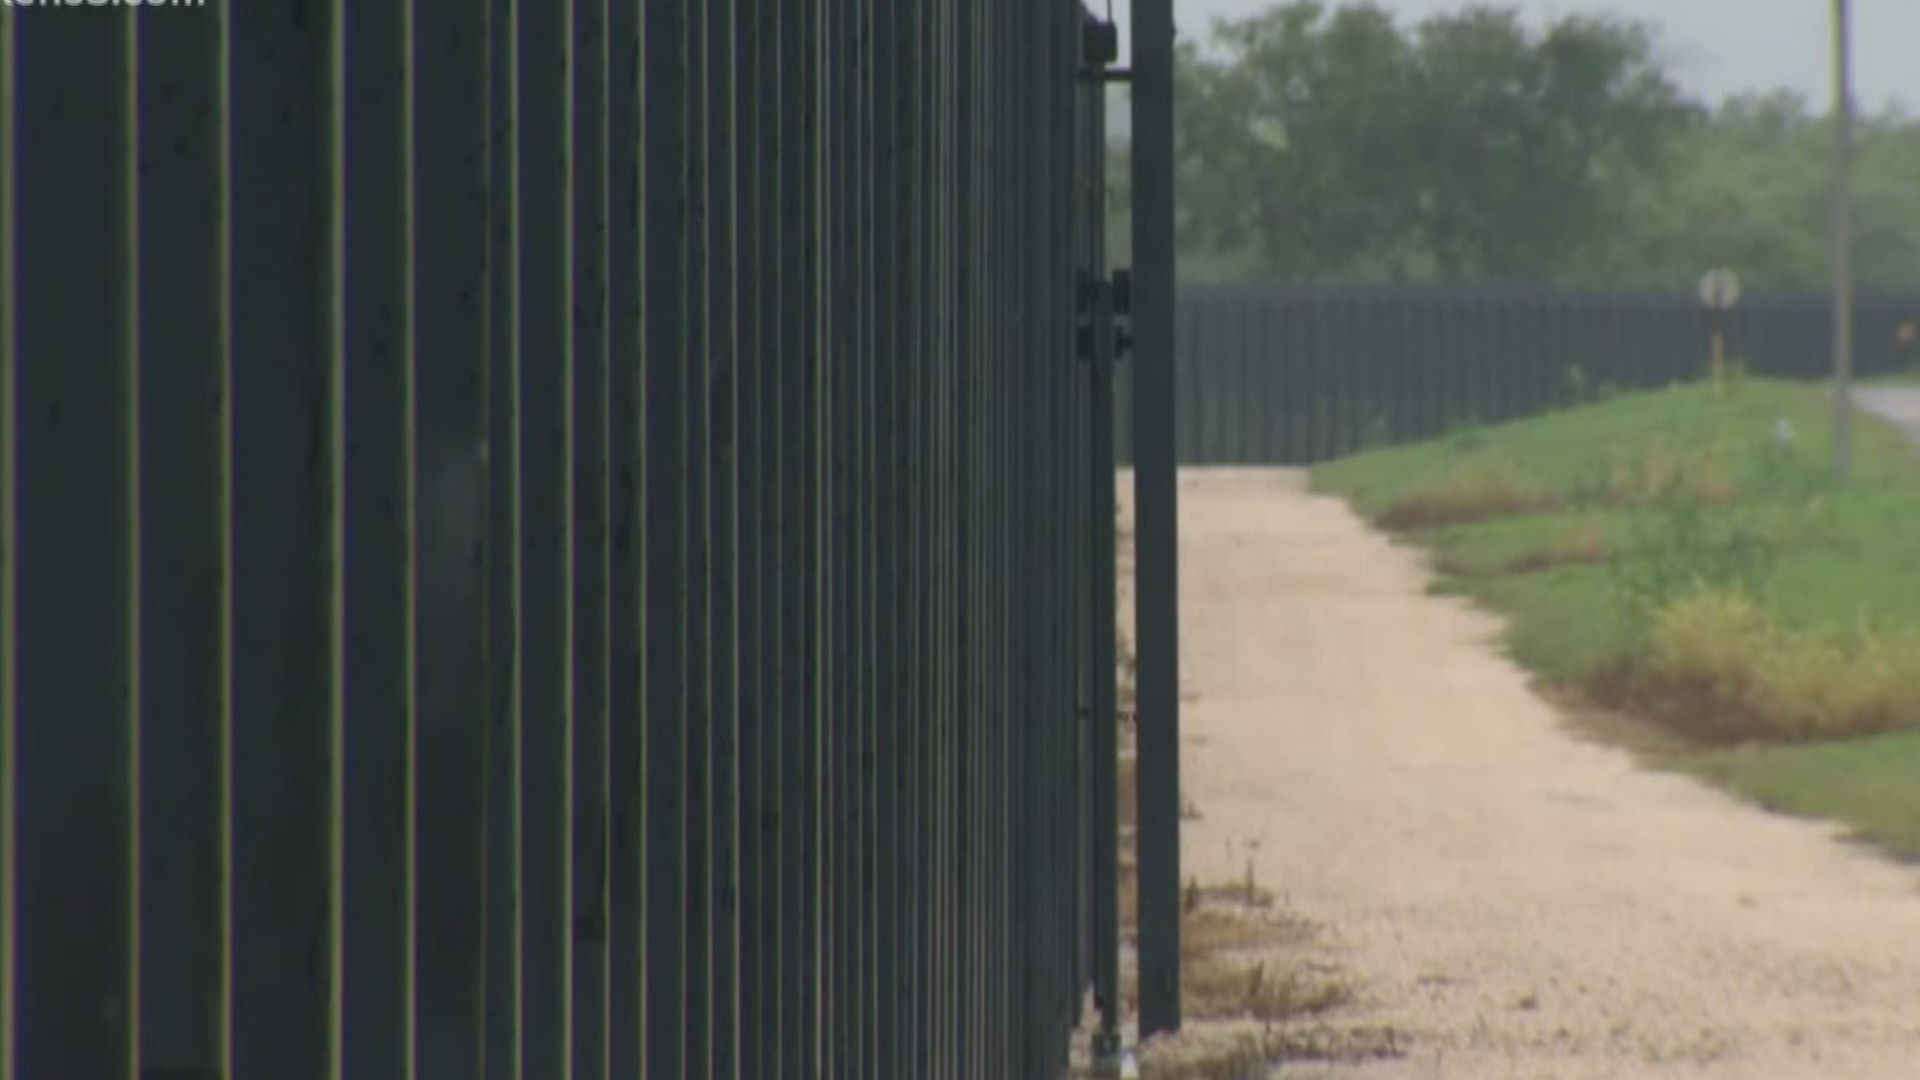 Just two hours south of San Antonio, Border Patrol in Del Rio say they are in dire of help not just to secure the border, but to care for family units that have crossed.